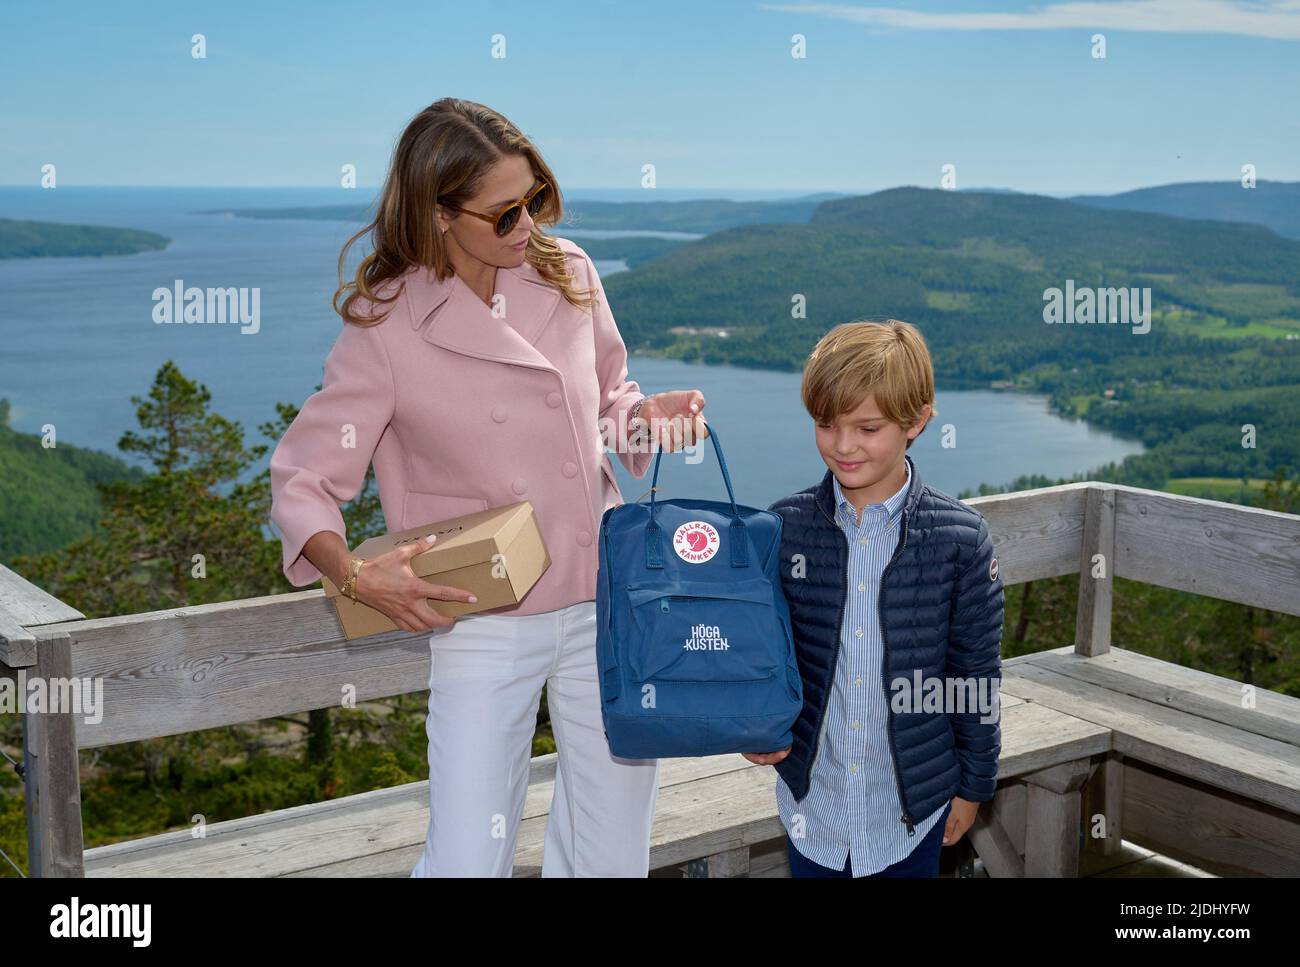 Skuleberget, Sweden, June 21, 2022. Prince Nicolas, Duke of Ångermanland, and his parents. Princess Madeleine of Sweden and Christopher O'Neill visit Skuleberget in north Sweden. Prince Nicolas will then inaugurate the discovery park and get a guided tour at 'Naturum Höga Kusten'. Picture: Princess Madeleine of Sweden prince Nicholas with the swedish brand Fjällräven backpack . June 21, 2022. Photo by Stefan Lindblom/Stella Pictures/ABACAPRESS.COM Stock Photo